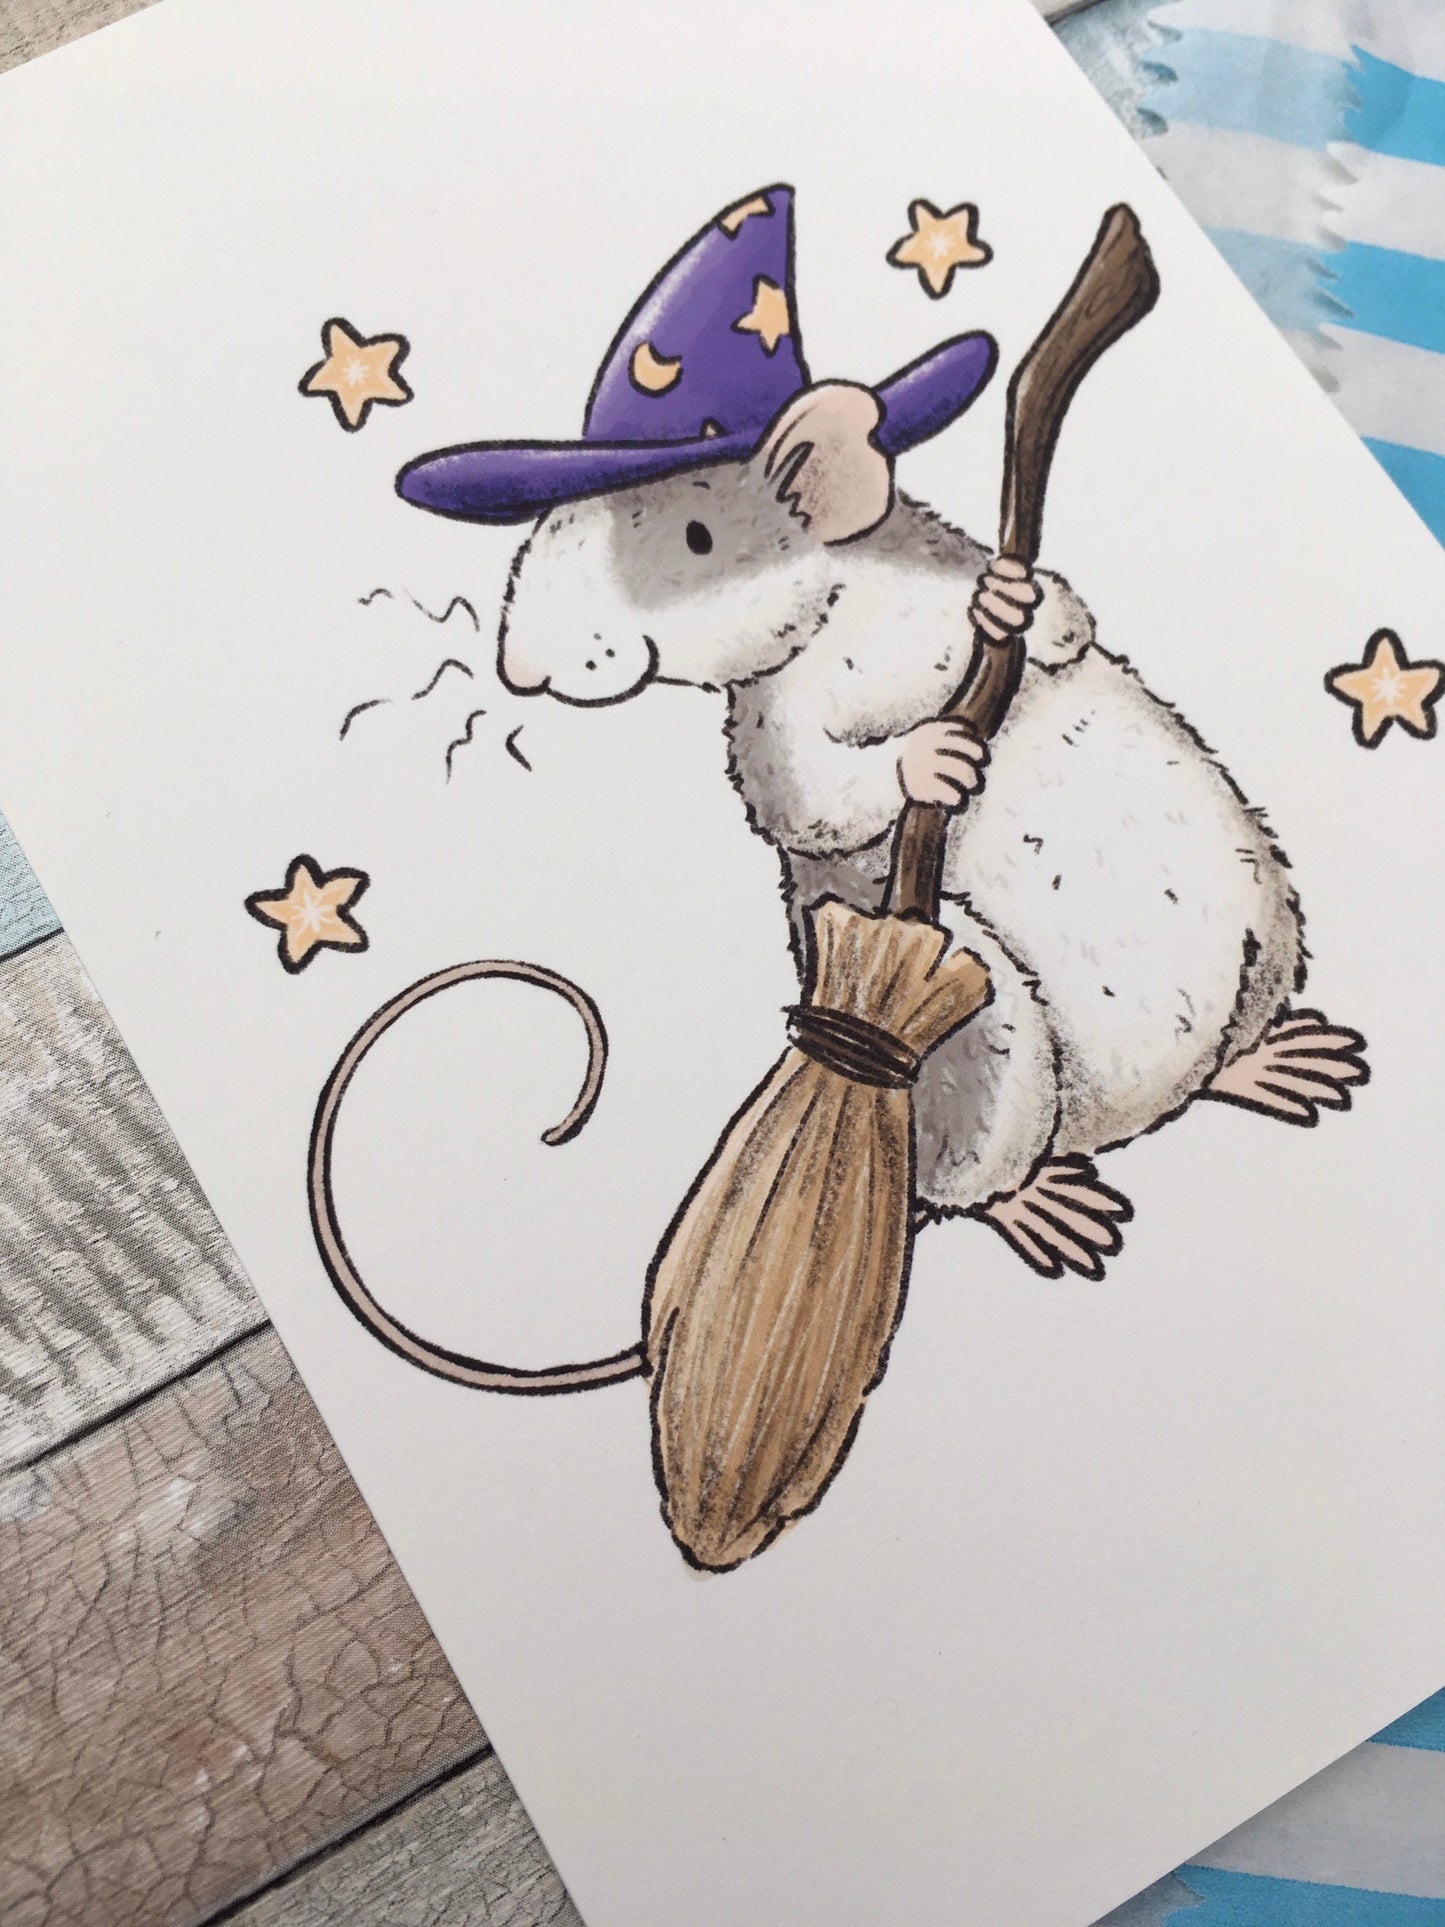 Willow The Witch Rat Art Print - A5 and 6 x 4 Inch Sizes - Cute Pet Rat Wall Art - Fancy Rat Gift